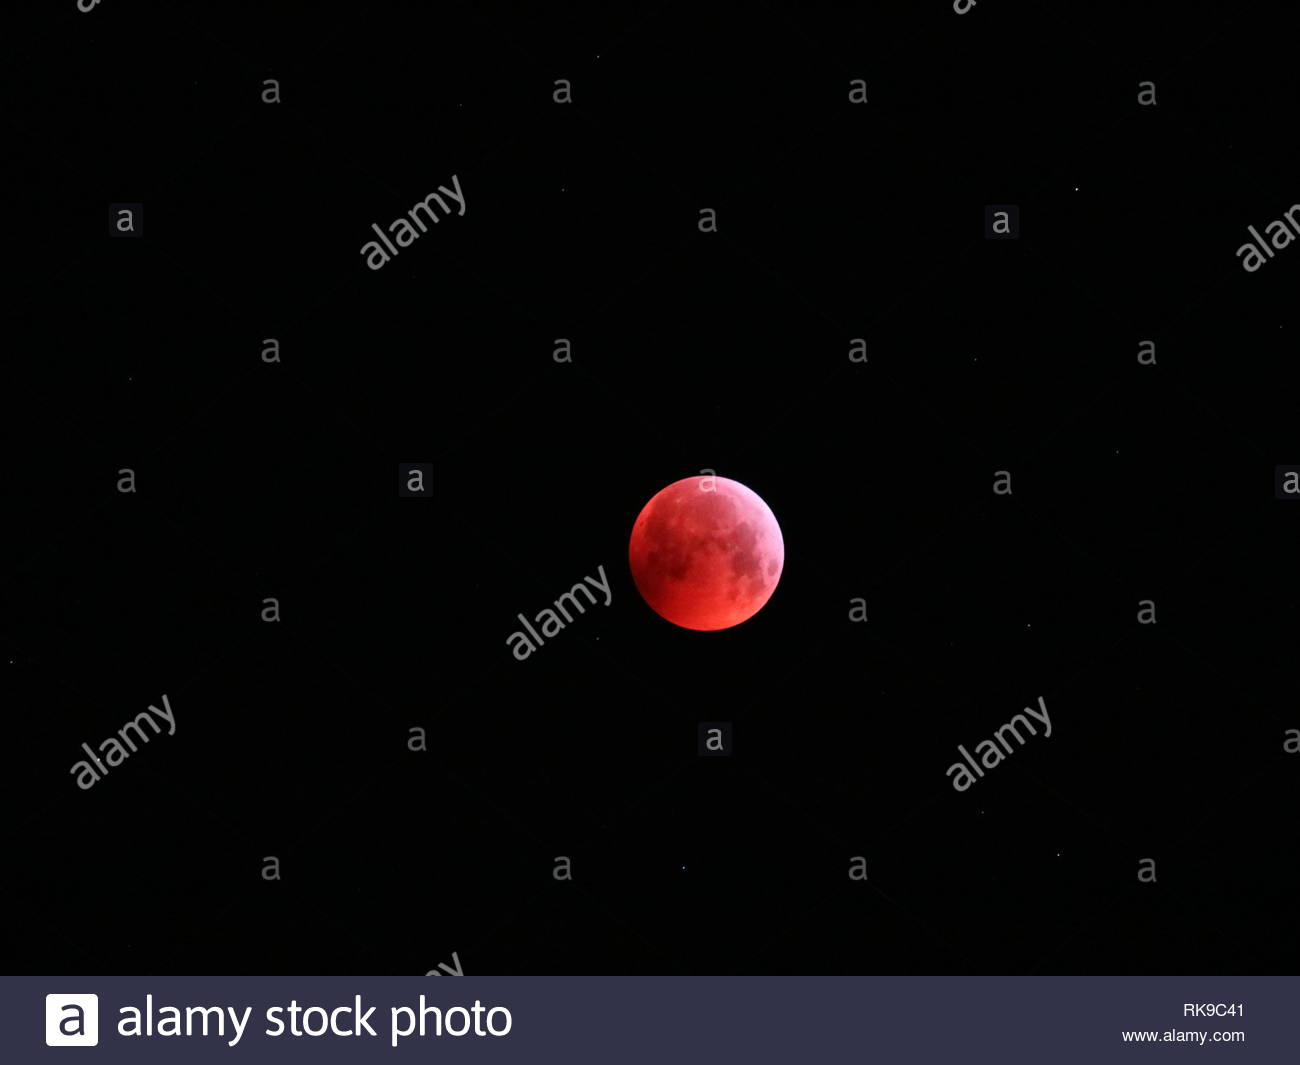 Bloodmoon In The Sky With Stars Background Stock Photo